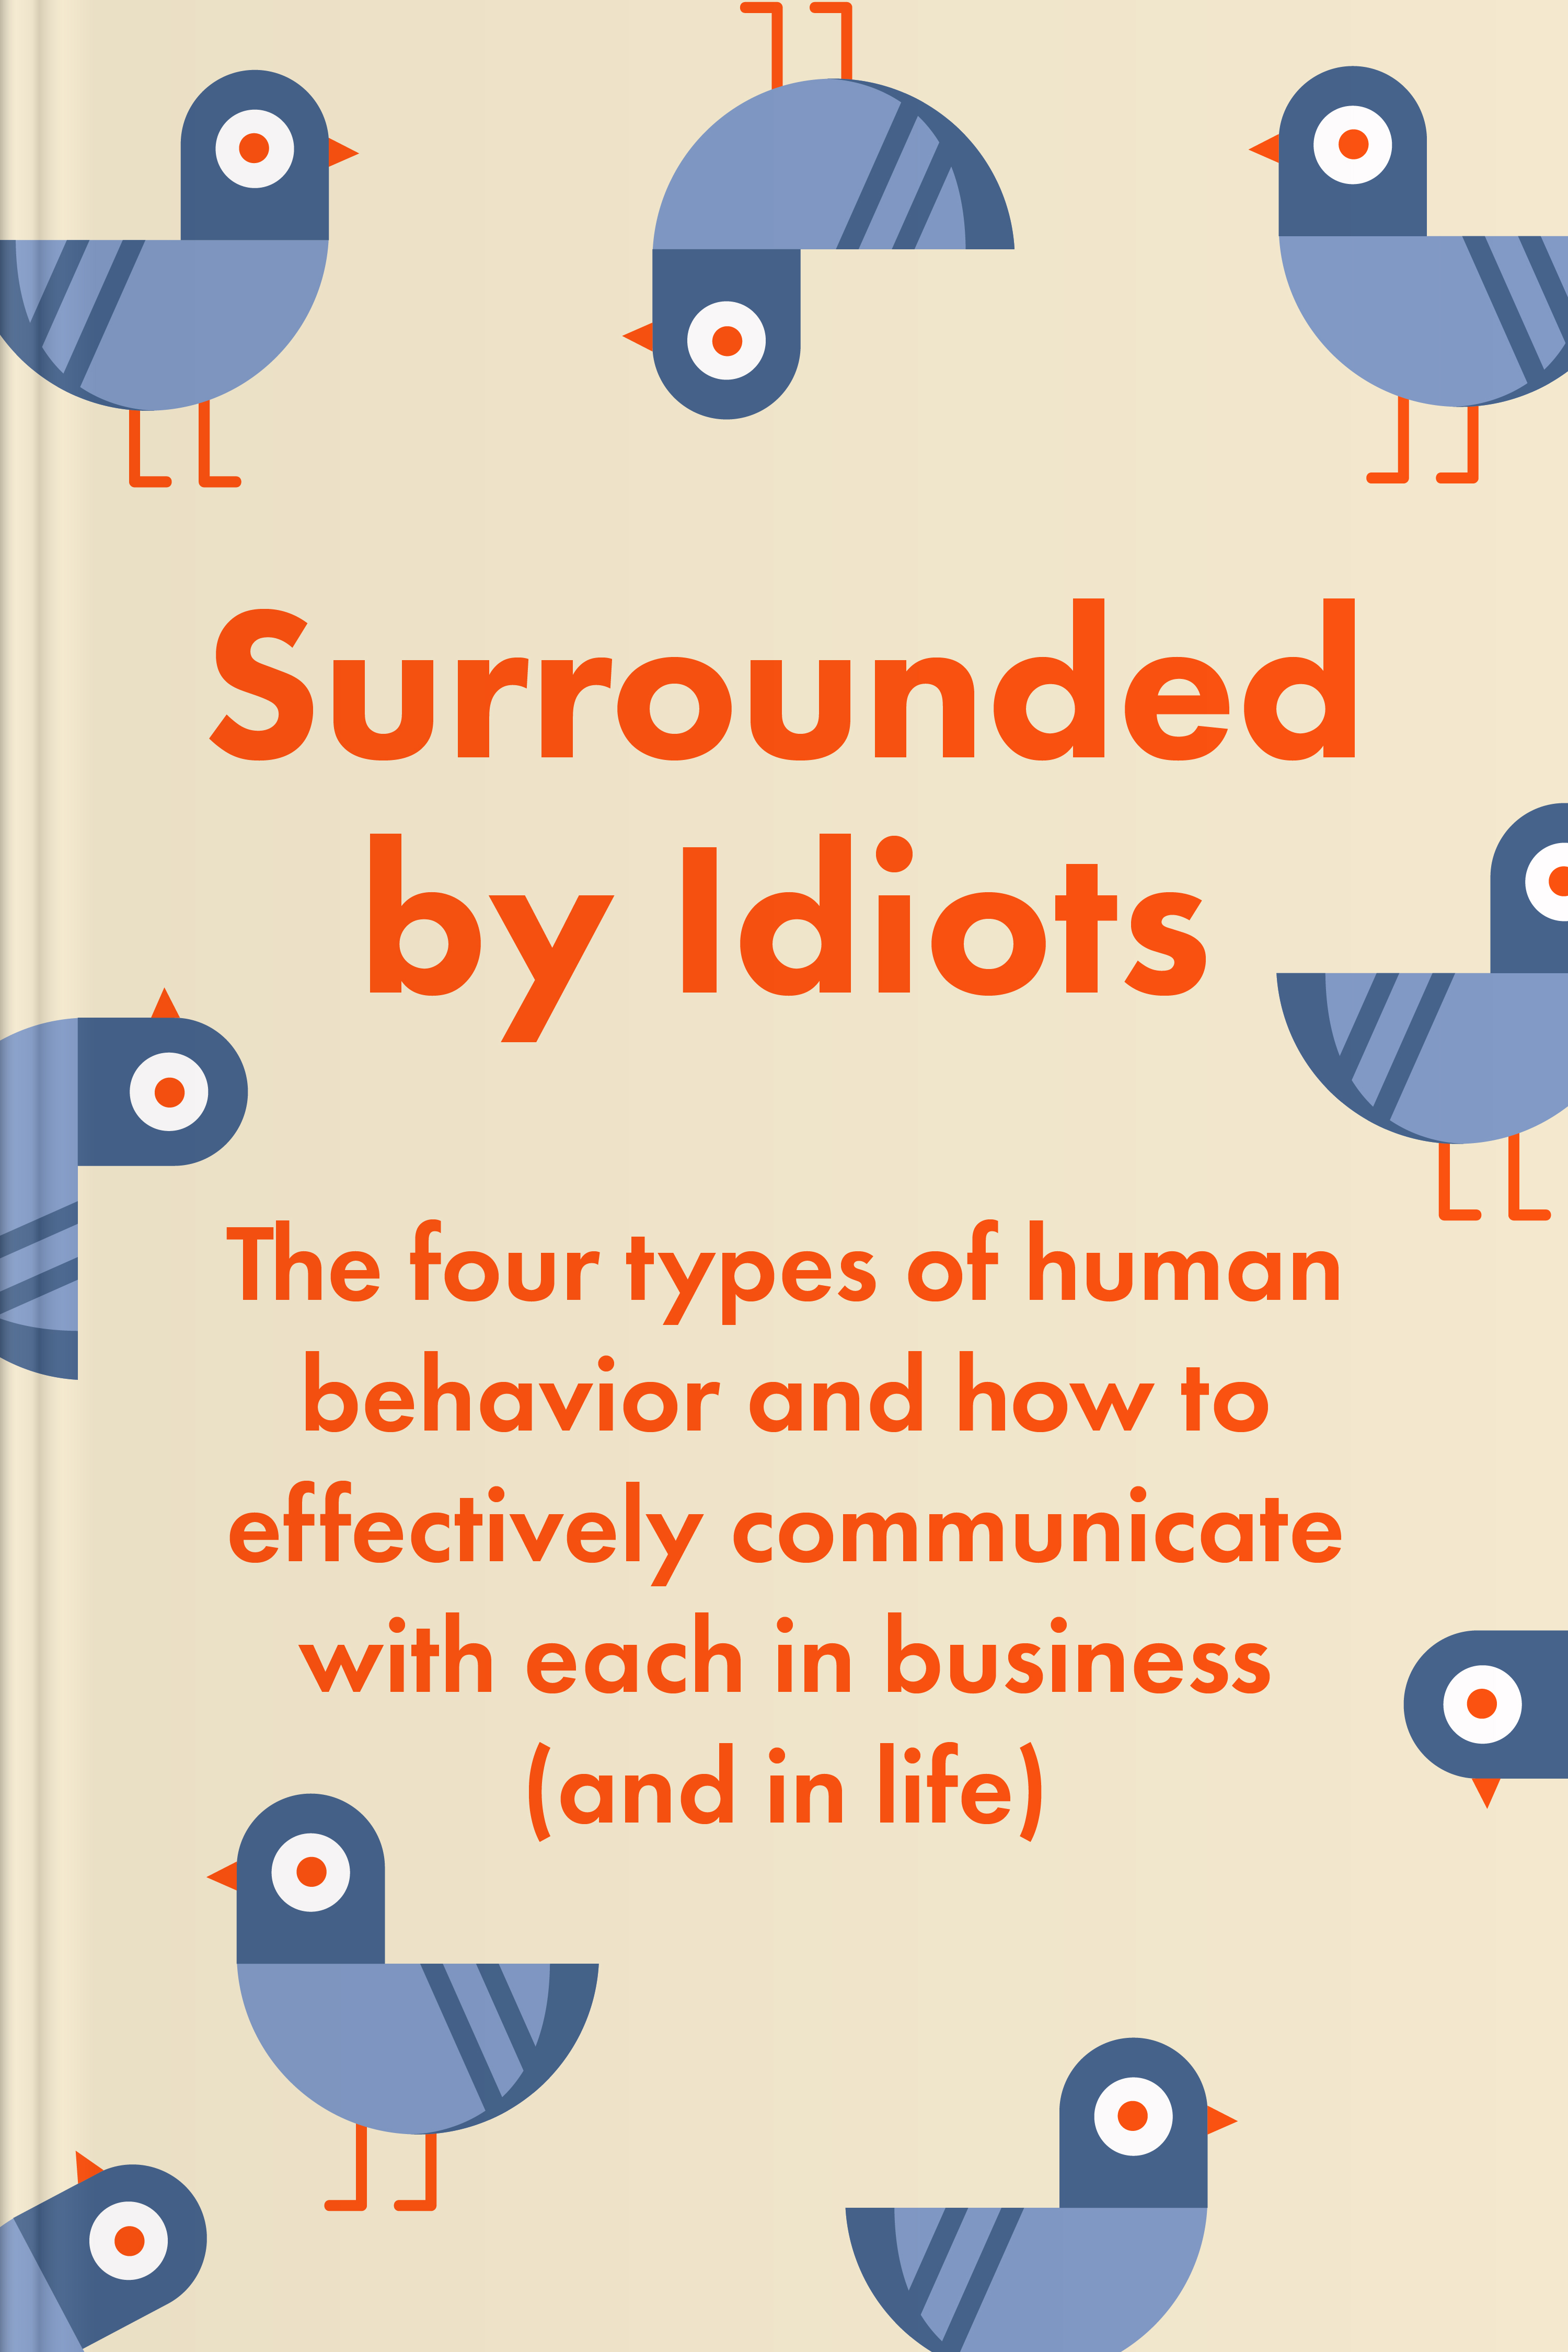 Book Review: Surrounded by Idiots